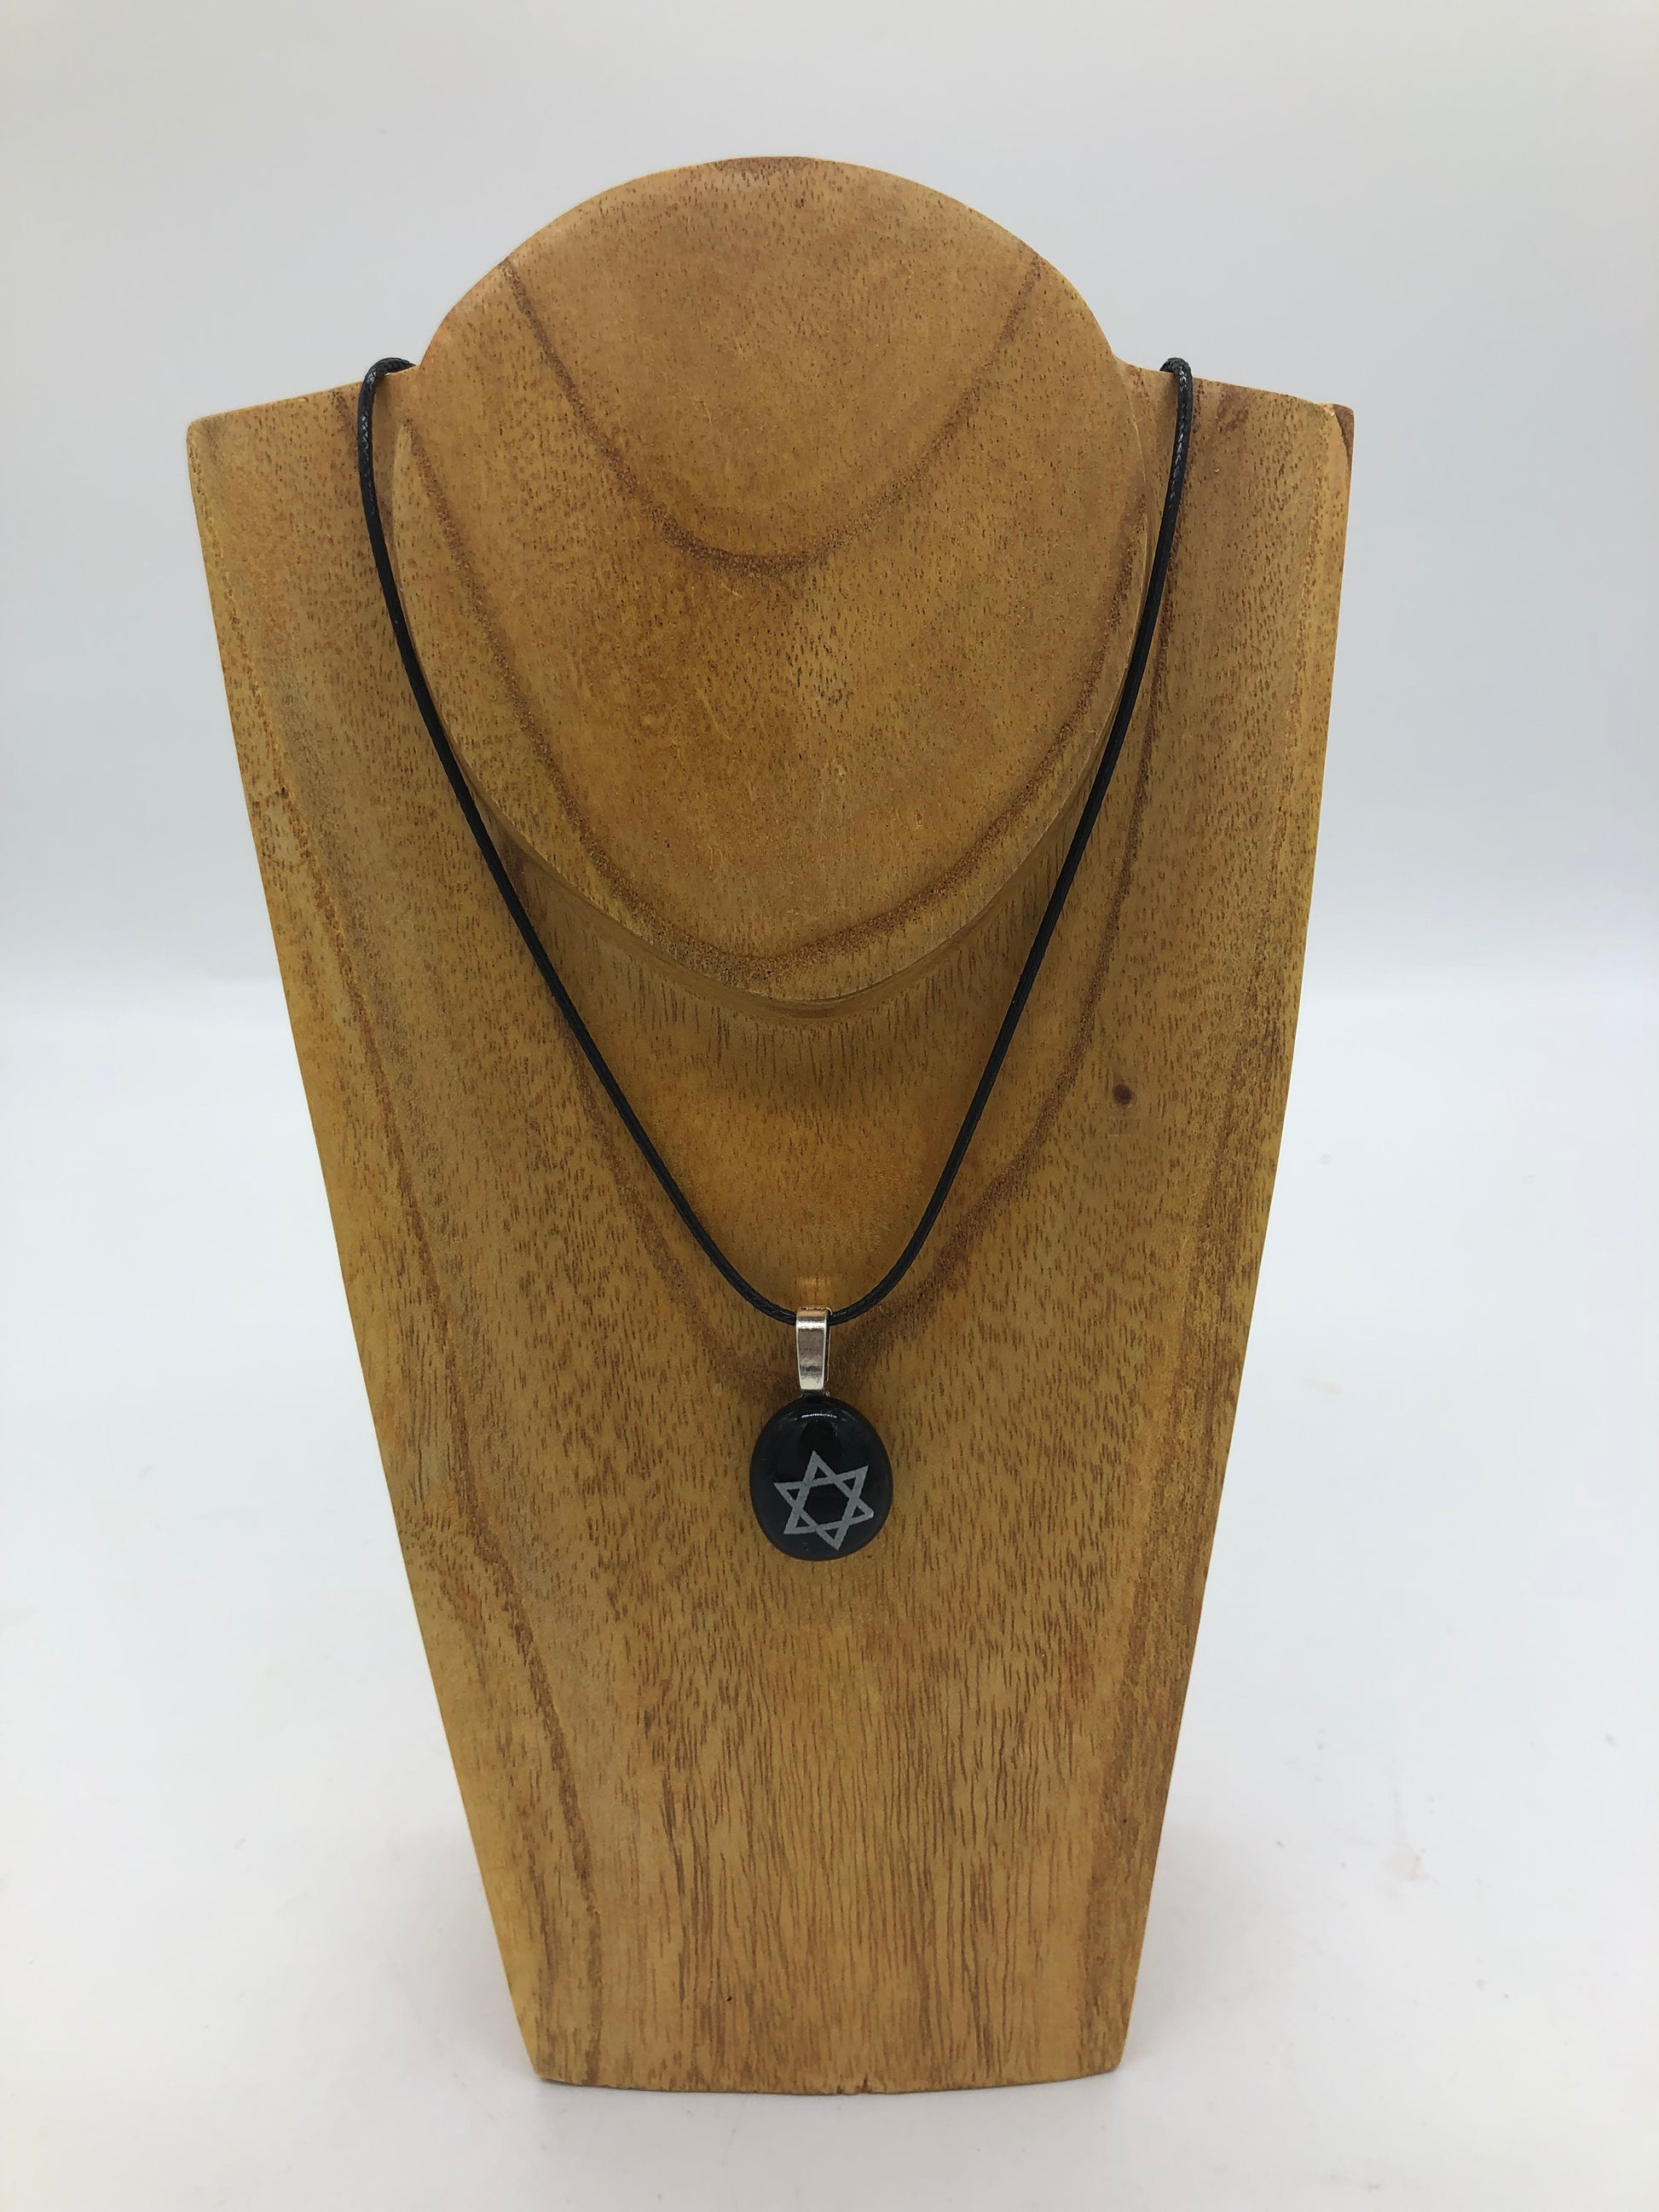 Fused glass necklace on a black cord, displayed on wooden holder.  Necklace design is a black circle with white star of David. center.